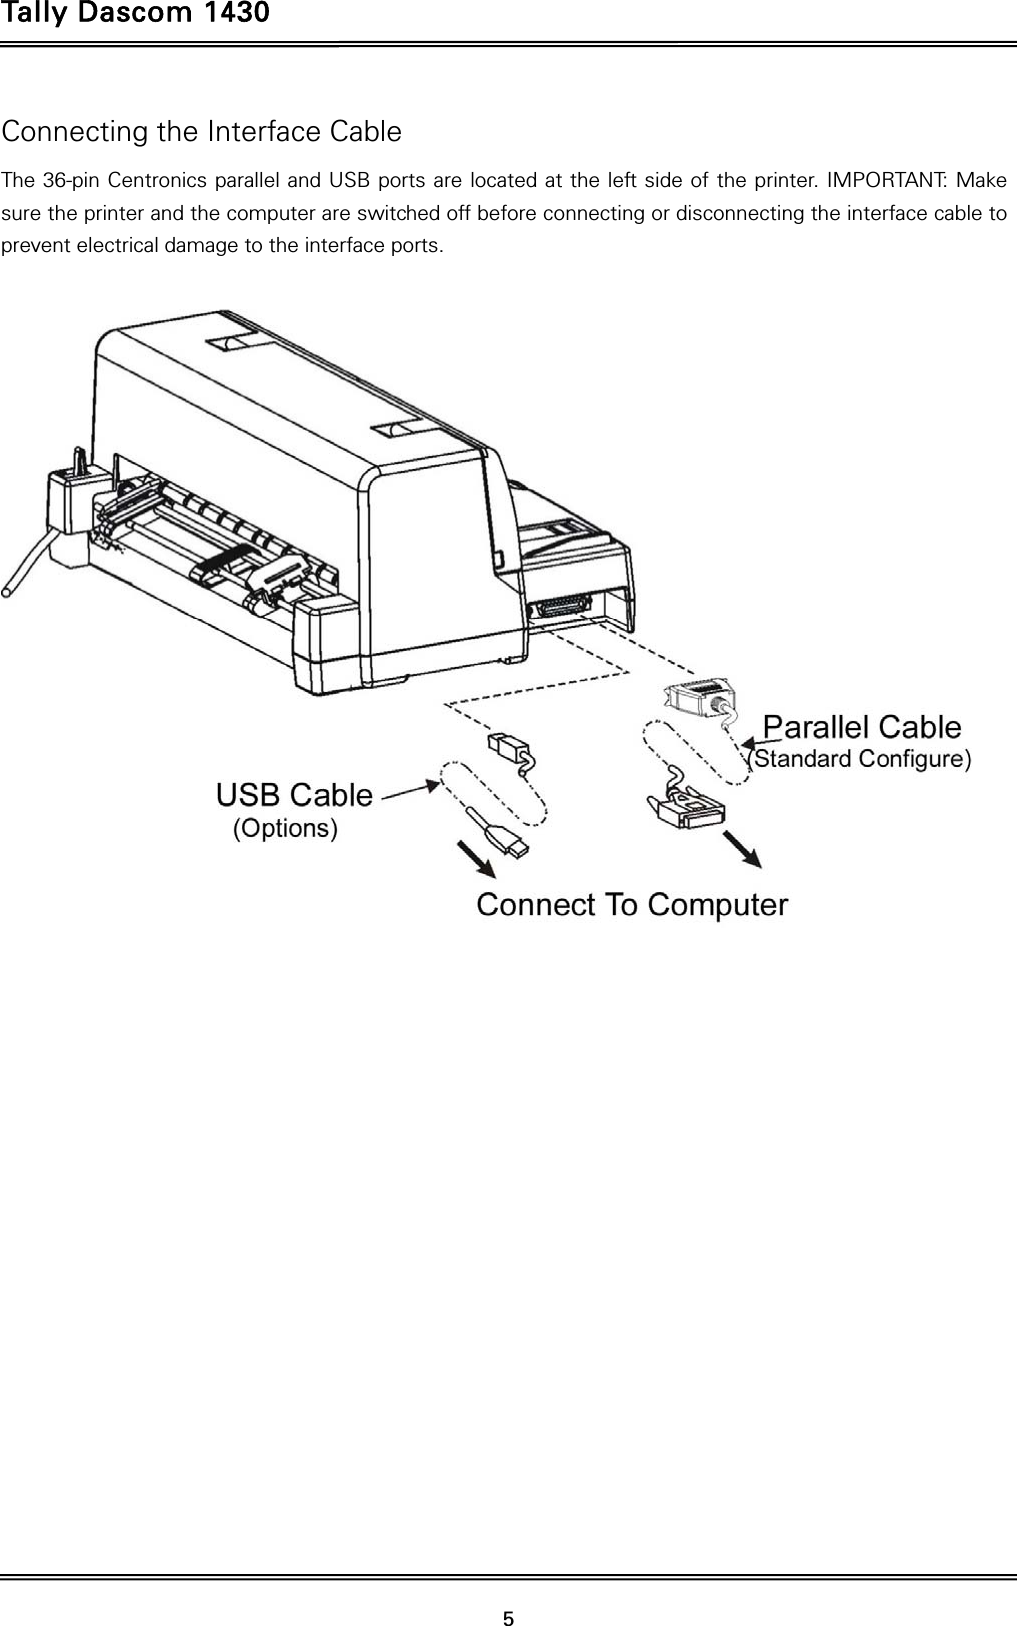 Tally Dascom 1430   5  Connecting the Interface Cable The 36-pin Centronics parallel and USB ports are located at the left side of the printer. IMPORTANT: Make sure the printer and the computer are switched off before connecting or disconnecting the interface cable to prevent electrical damage to the interface ports.   